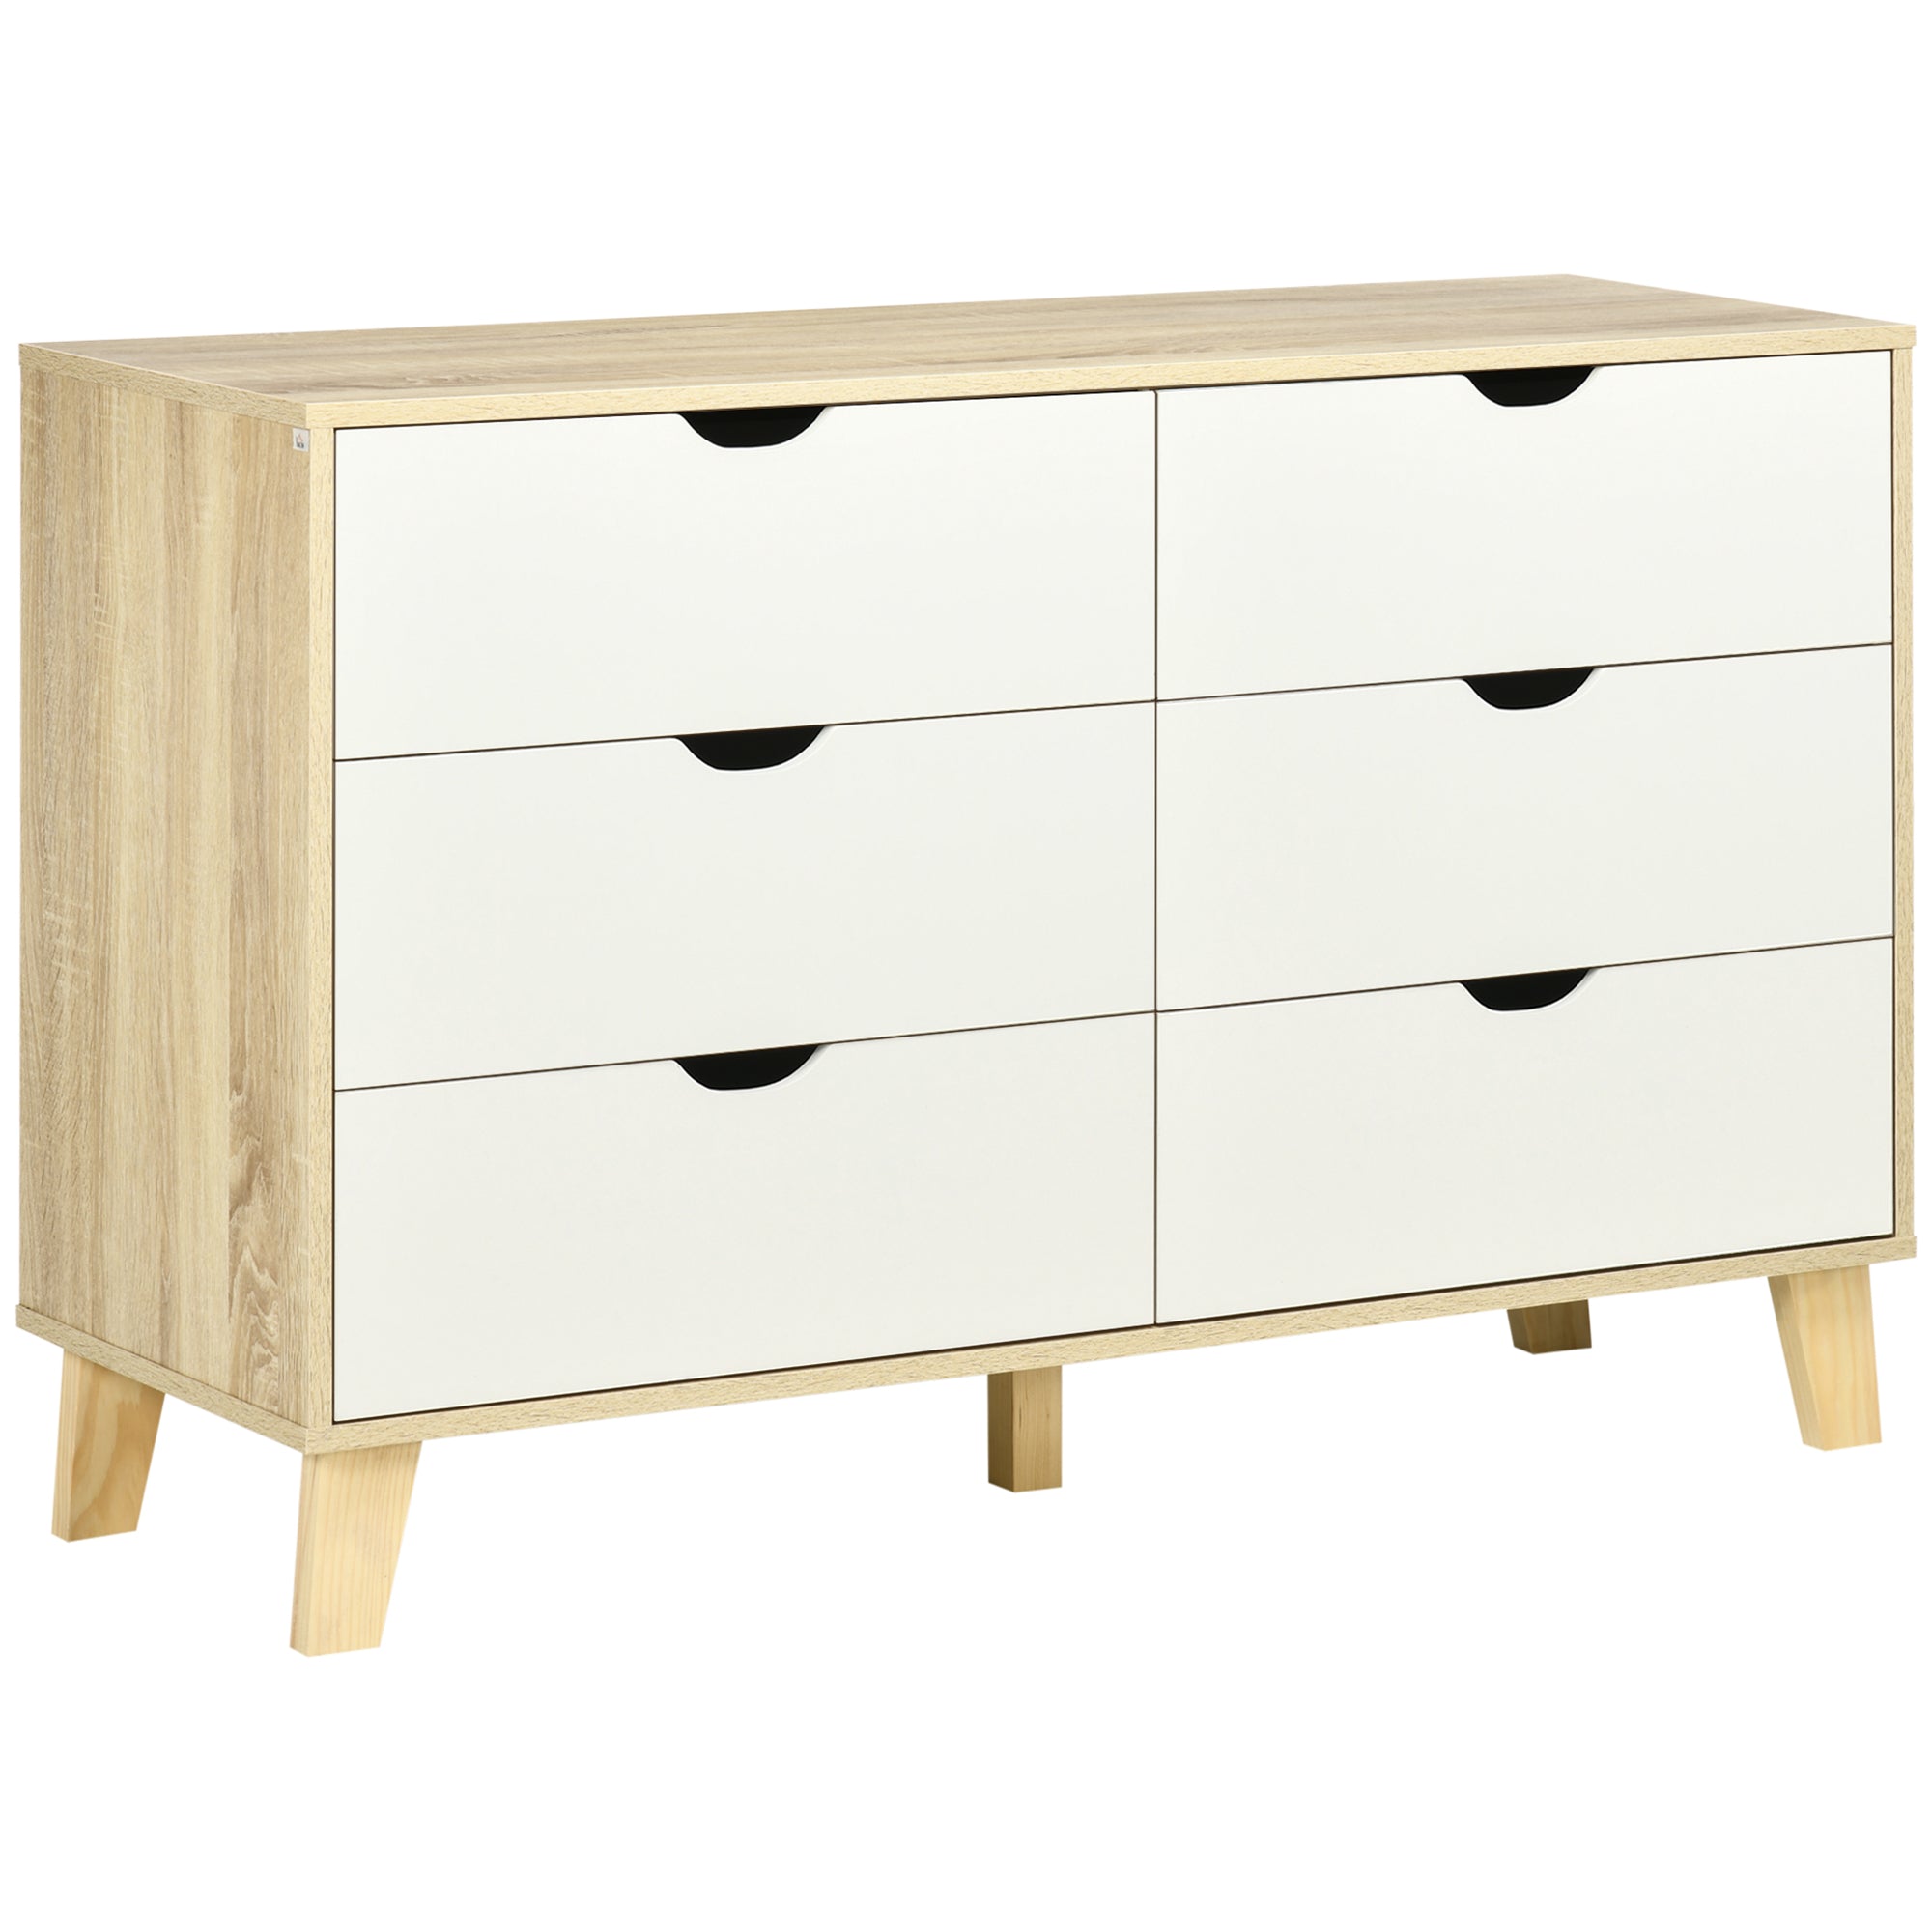 HOMCOM Chest of Drawers - 6 Drawer Unit Storage Chest Bedroom White and Brown  | TJ Hughes